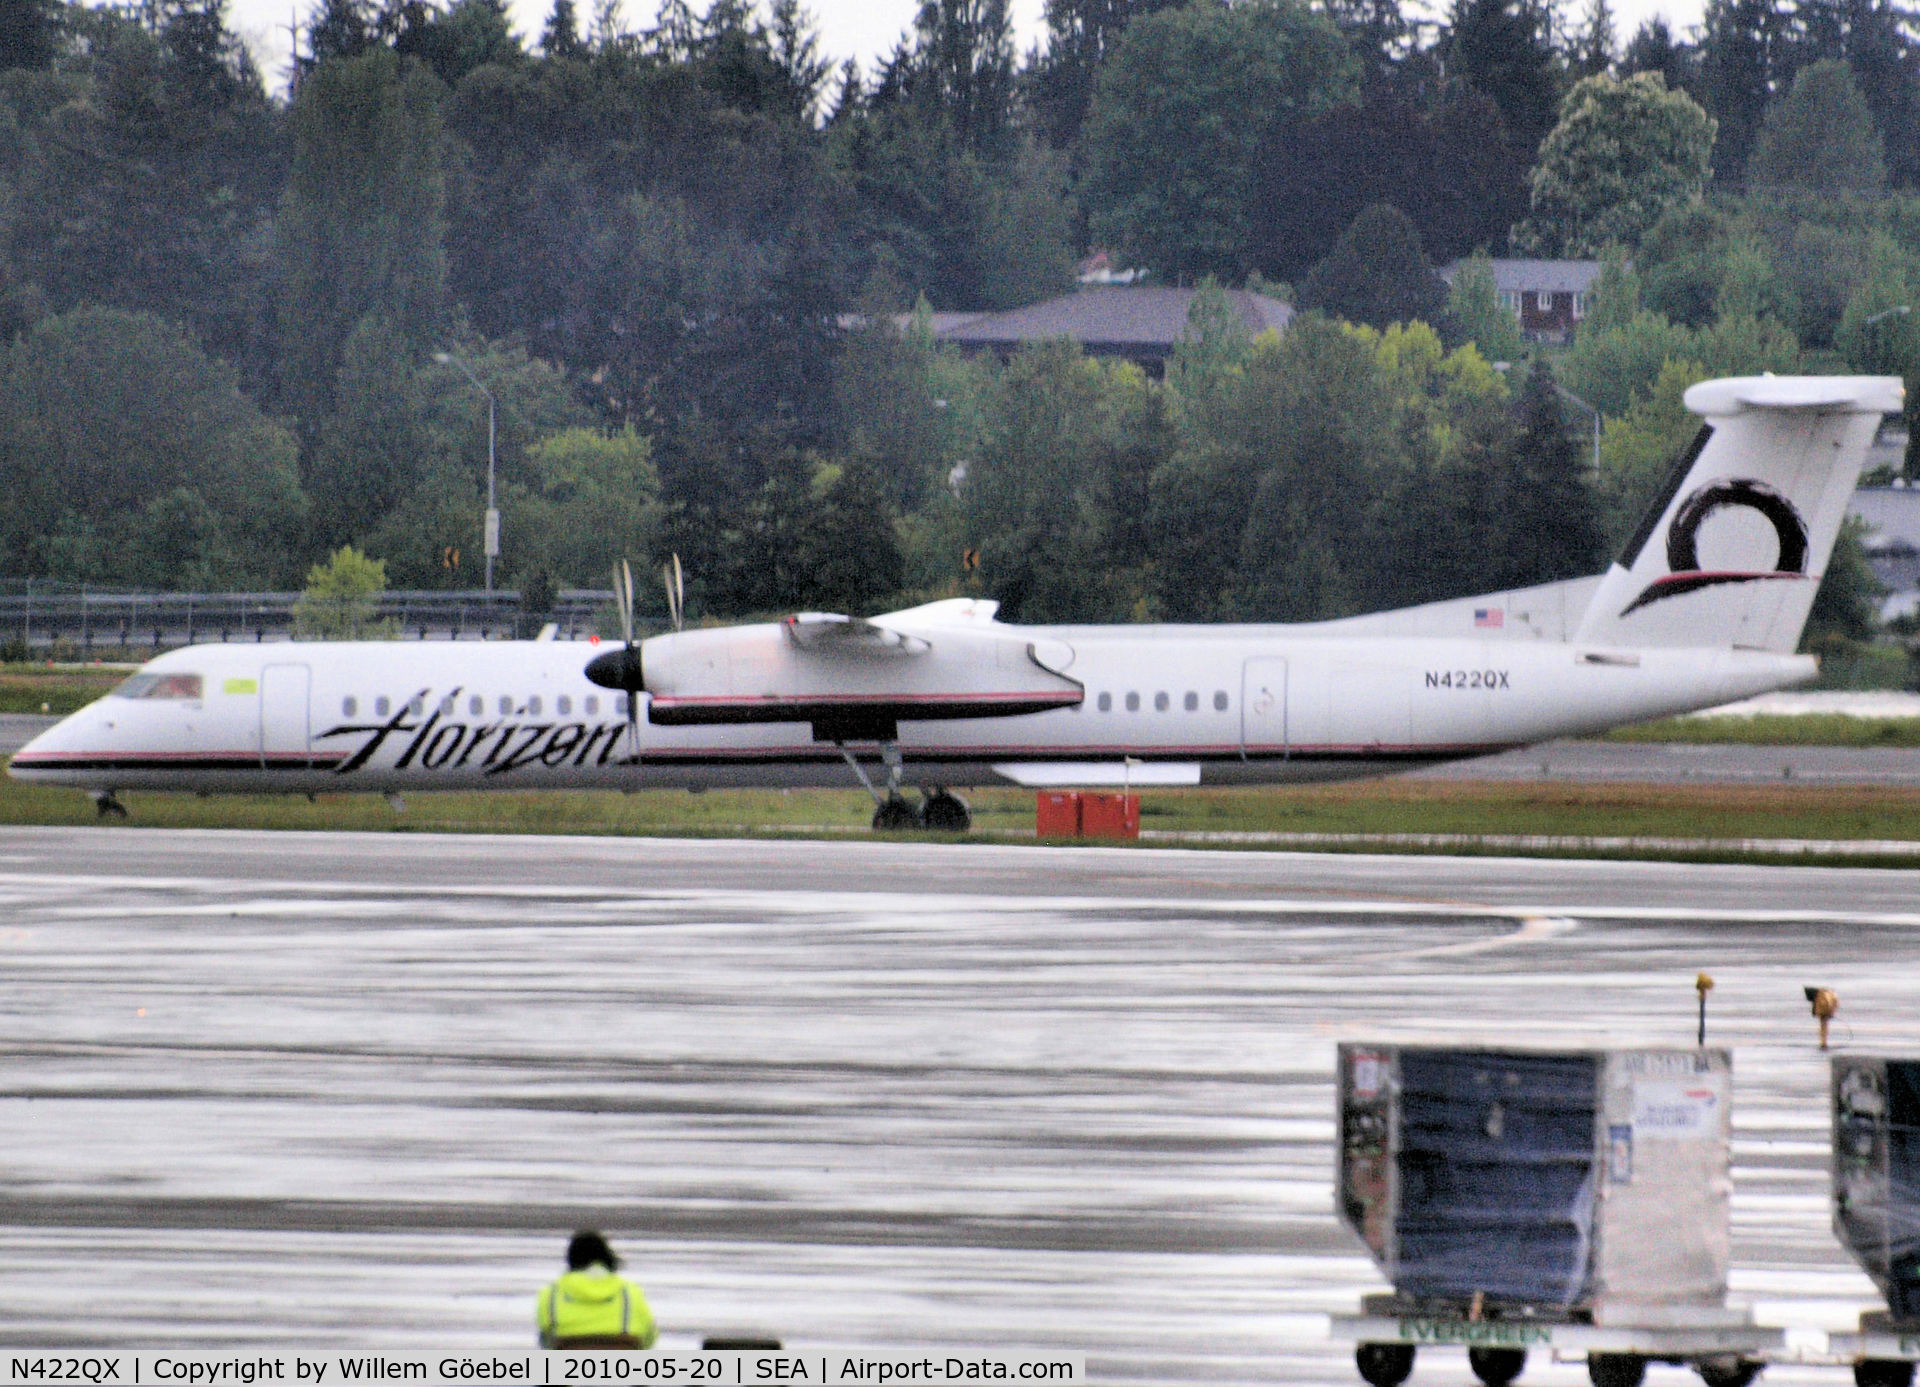 N422QX, 2007 Bombardier DHC-8-402 Dash 8 C/N 4150, Taxi to the runway of Seattle Airport